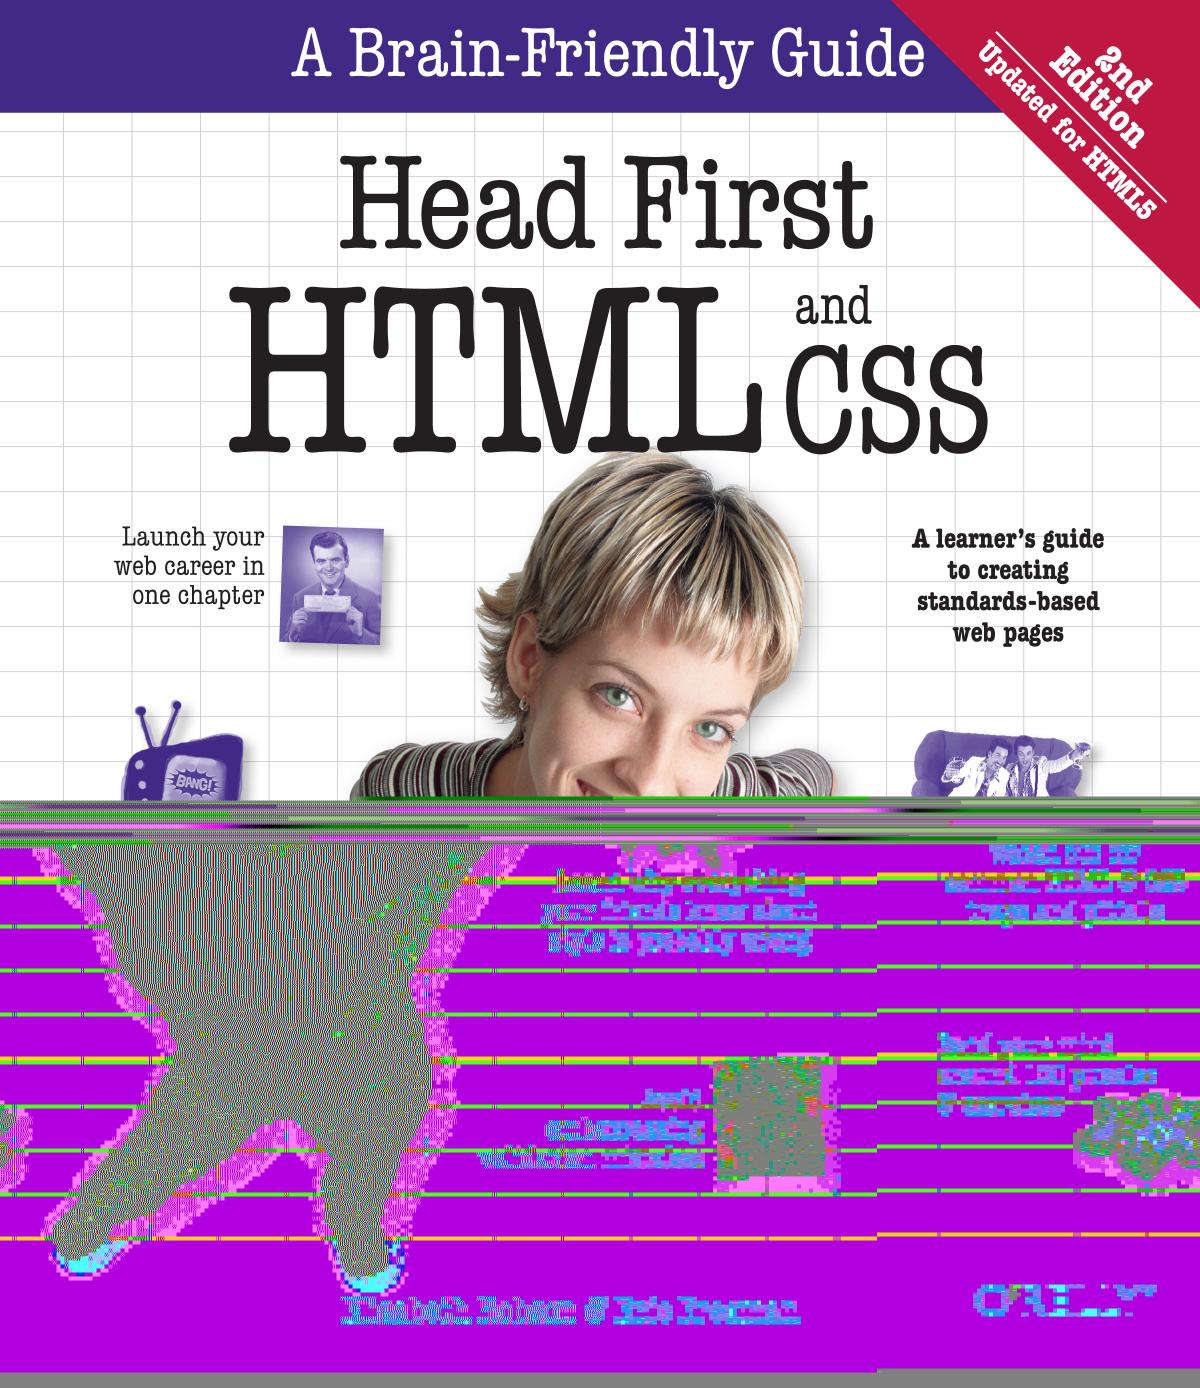 Head First HTML and CSS by Elisabeth Robson and Eric Freeman